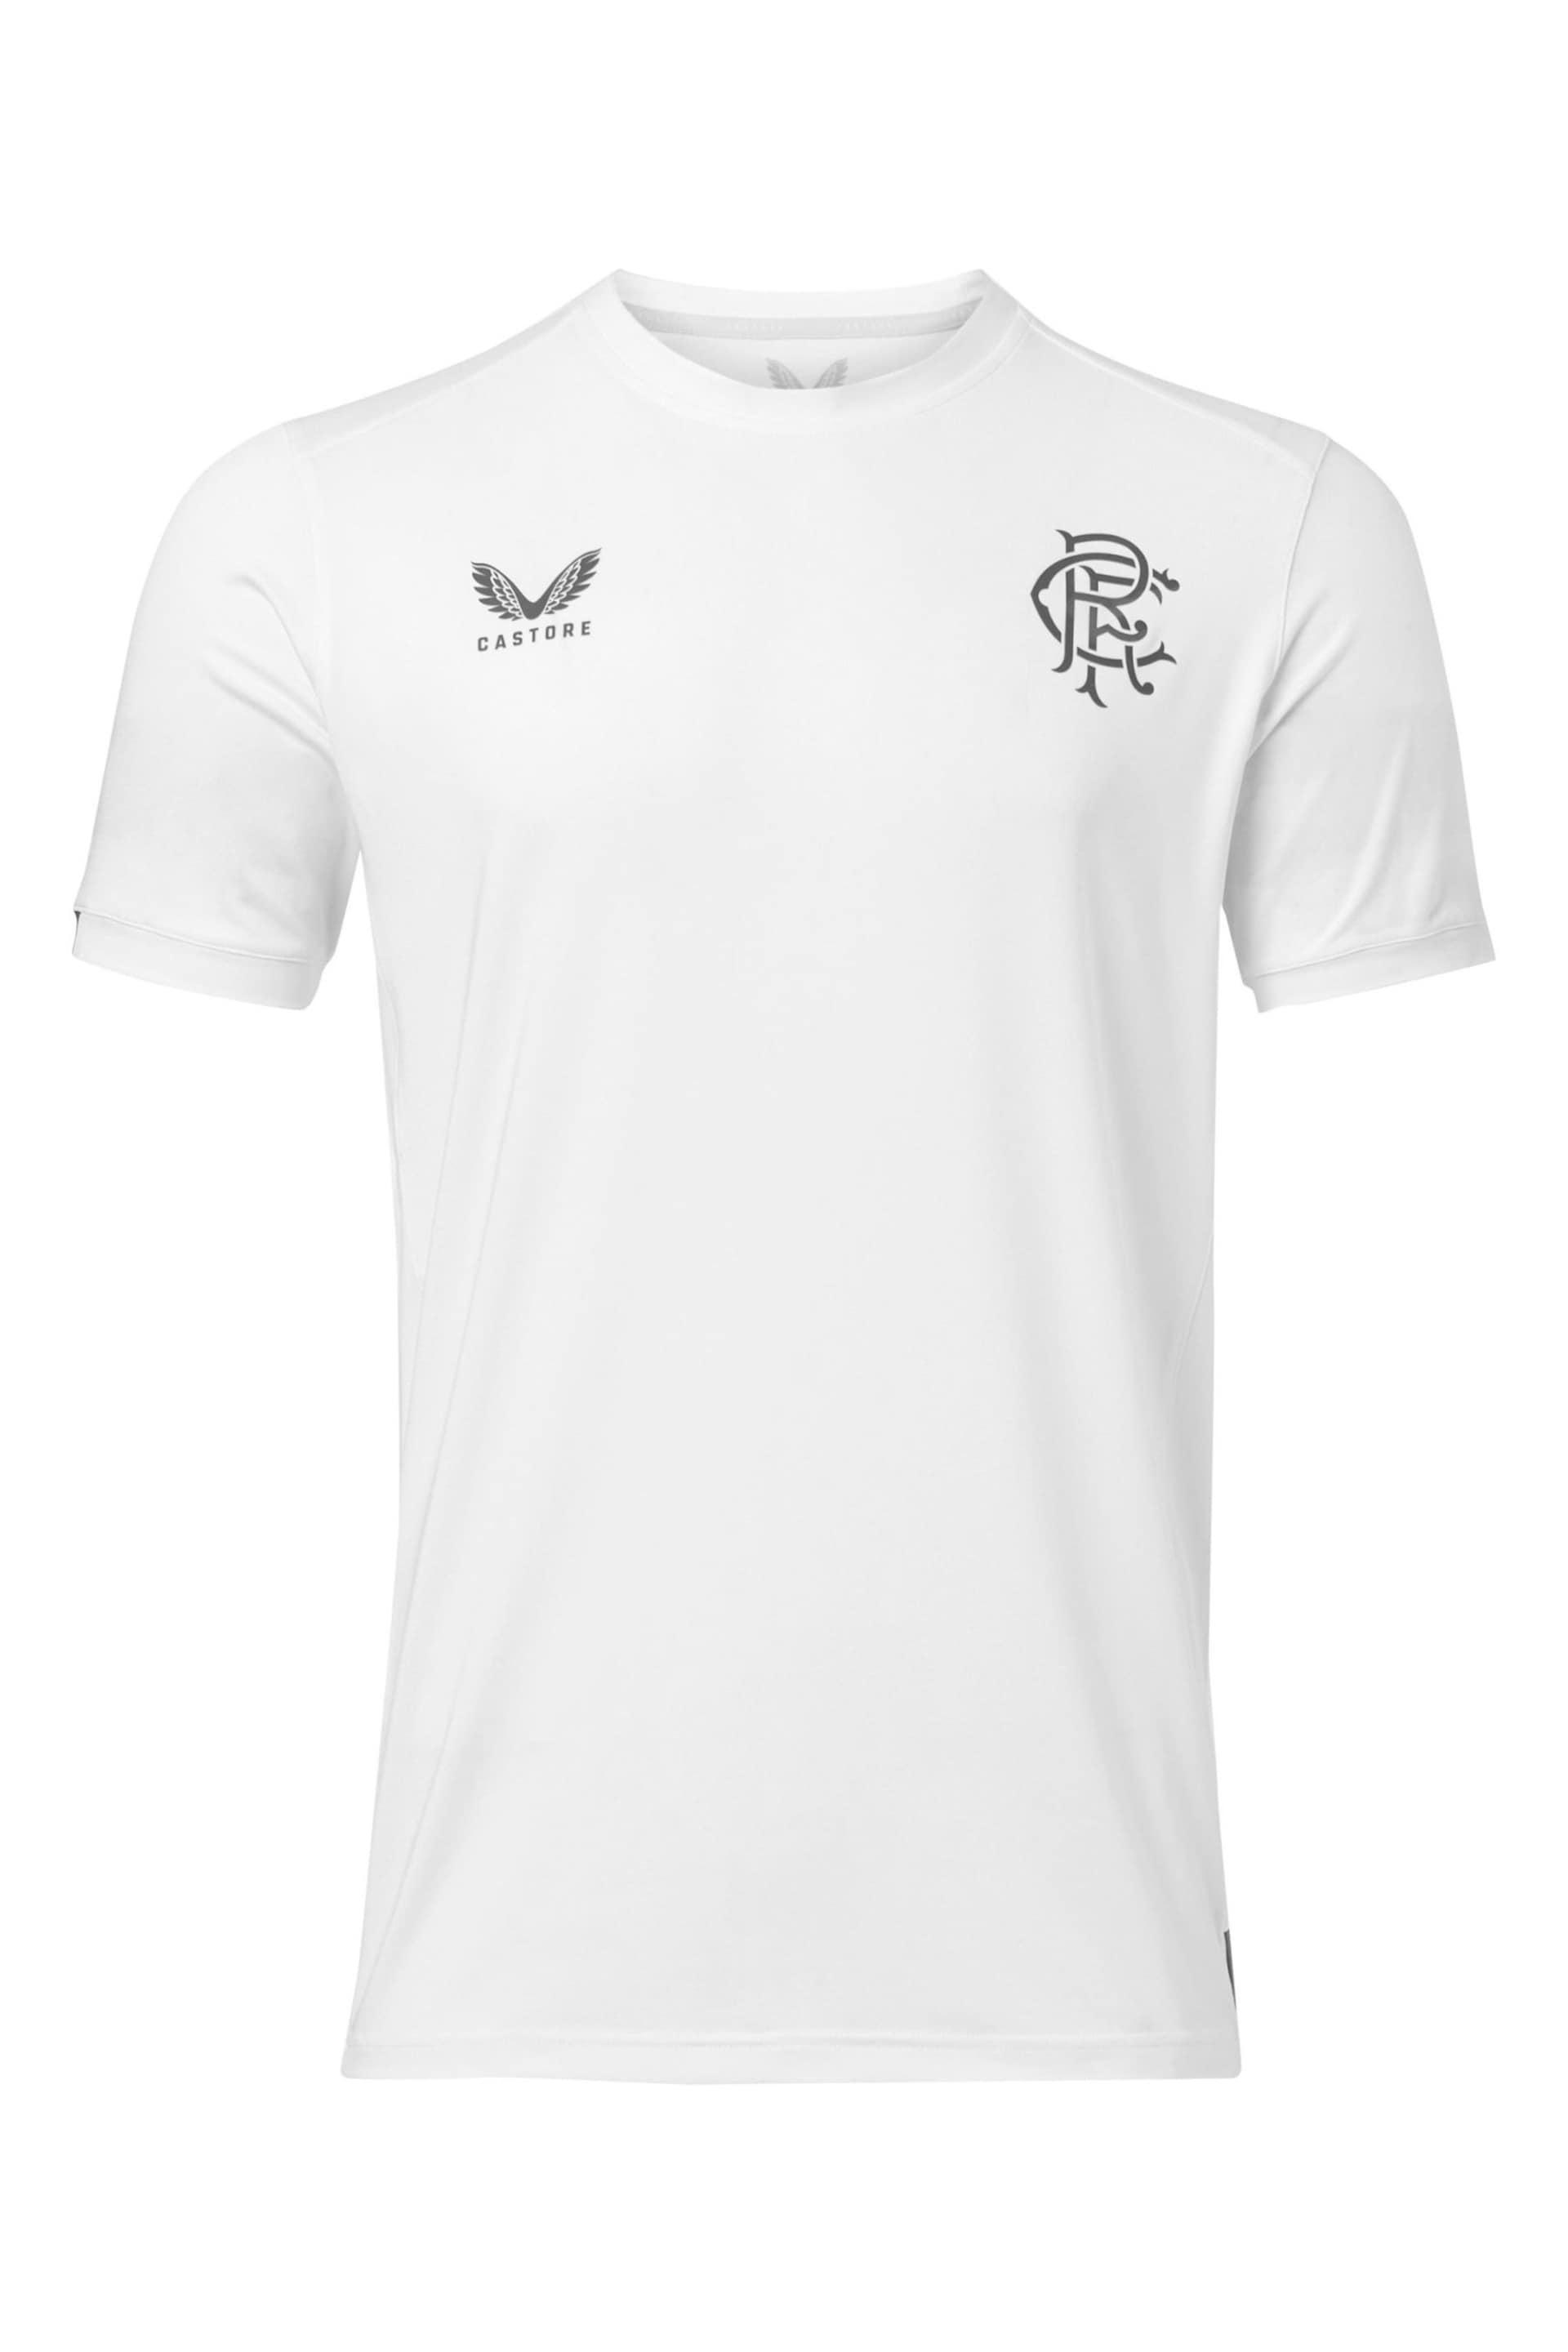 Castore Glasgow Rangers Players Travel White T-Shirt - Image 2 of 3